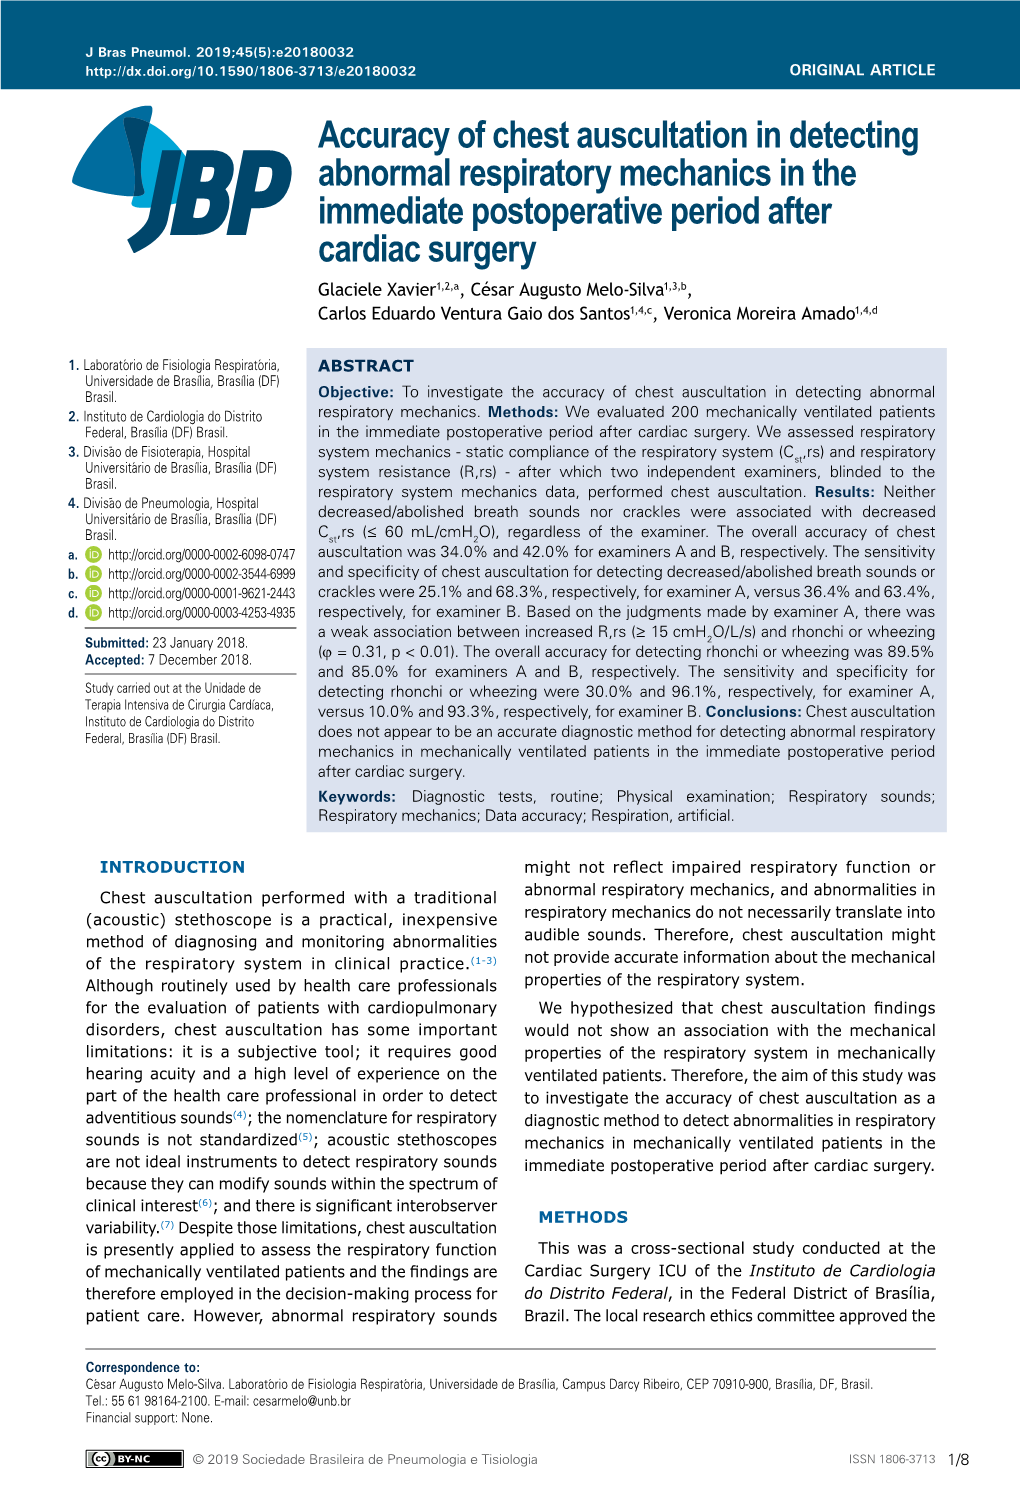 Accuracy of Chest Auscultation in Detecting Abnormal Respiratory Mechanics in the Immediate Postoperative Period After Cardiac S